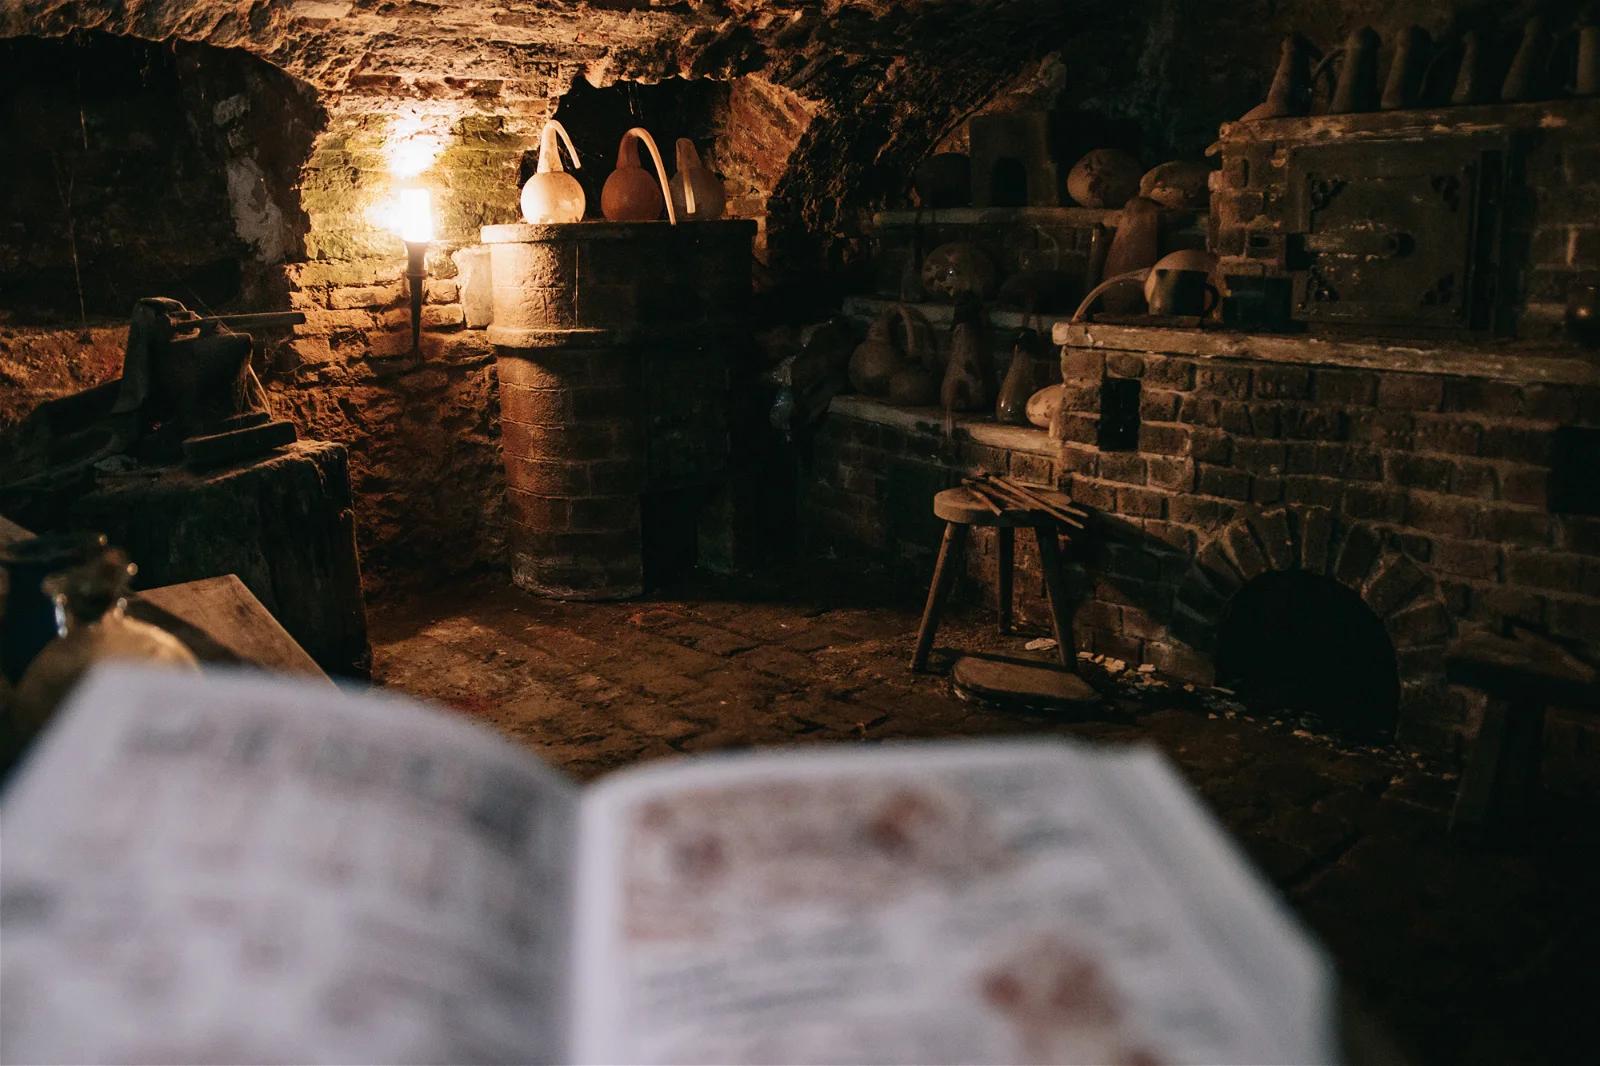 A close-up view of an open book with illustrations and notes, in a blurred, candlelit background suggesting a historical setting.
